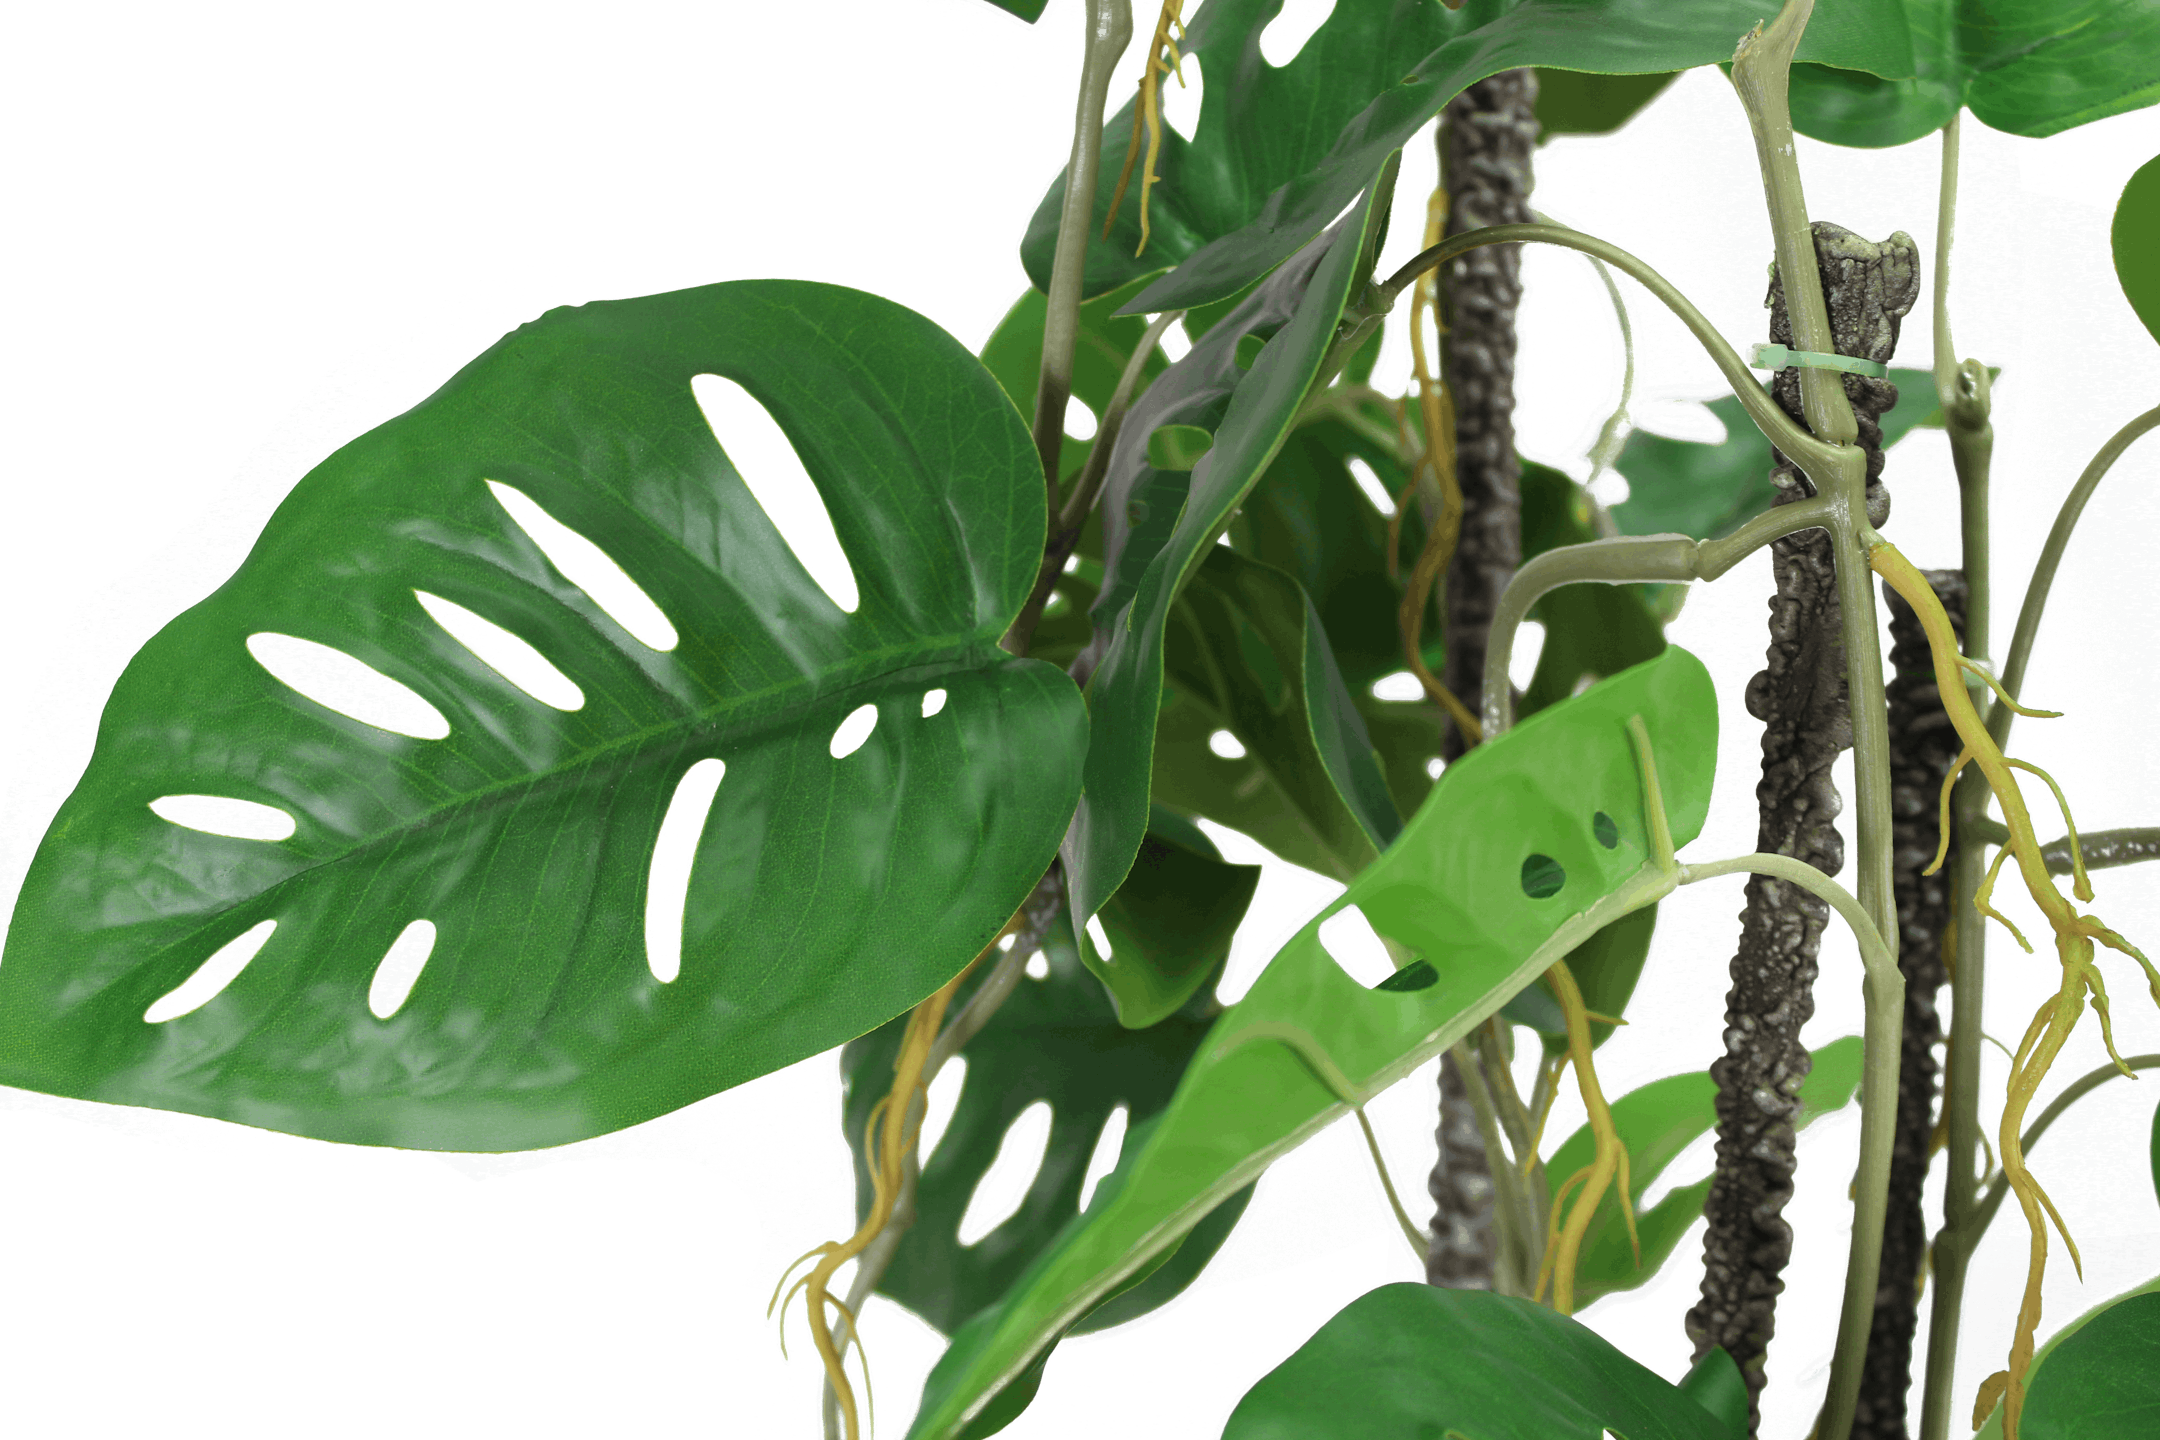 Artificial monkey monstera climbing plant closeup of foliage and support pole